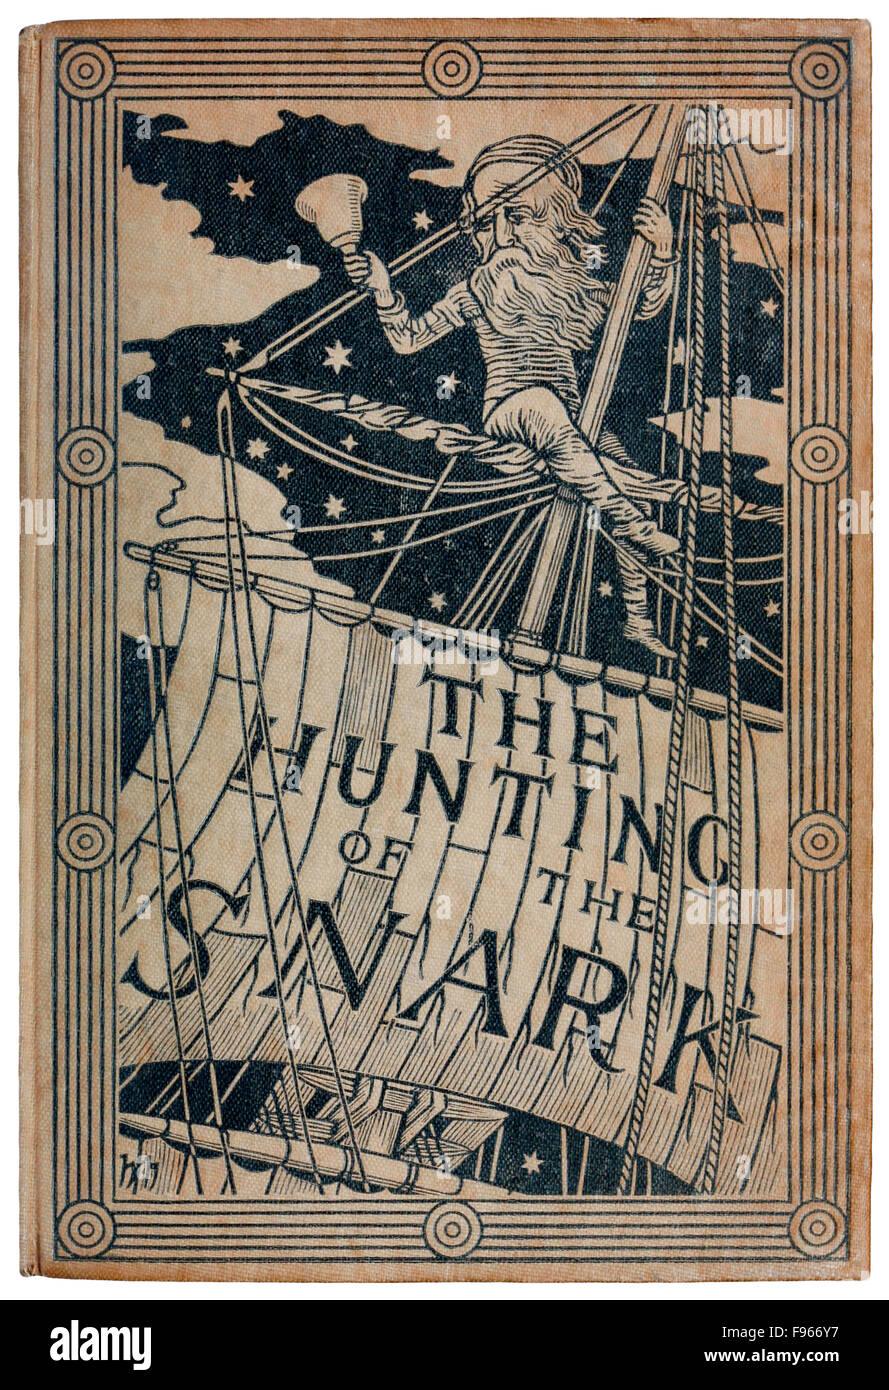 Front cover of 'The Hunting of the Snark – An Agony in Eight Fits’ by Lewis Carroll (1832-1898), illustrated by Henry Holiday (1839-1927) featuring the Bellman in the rigging. See description for more information. Stock Photo